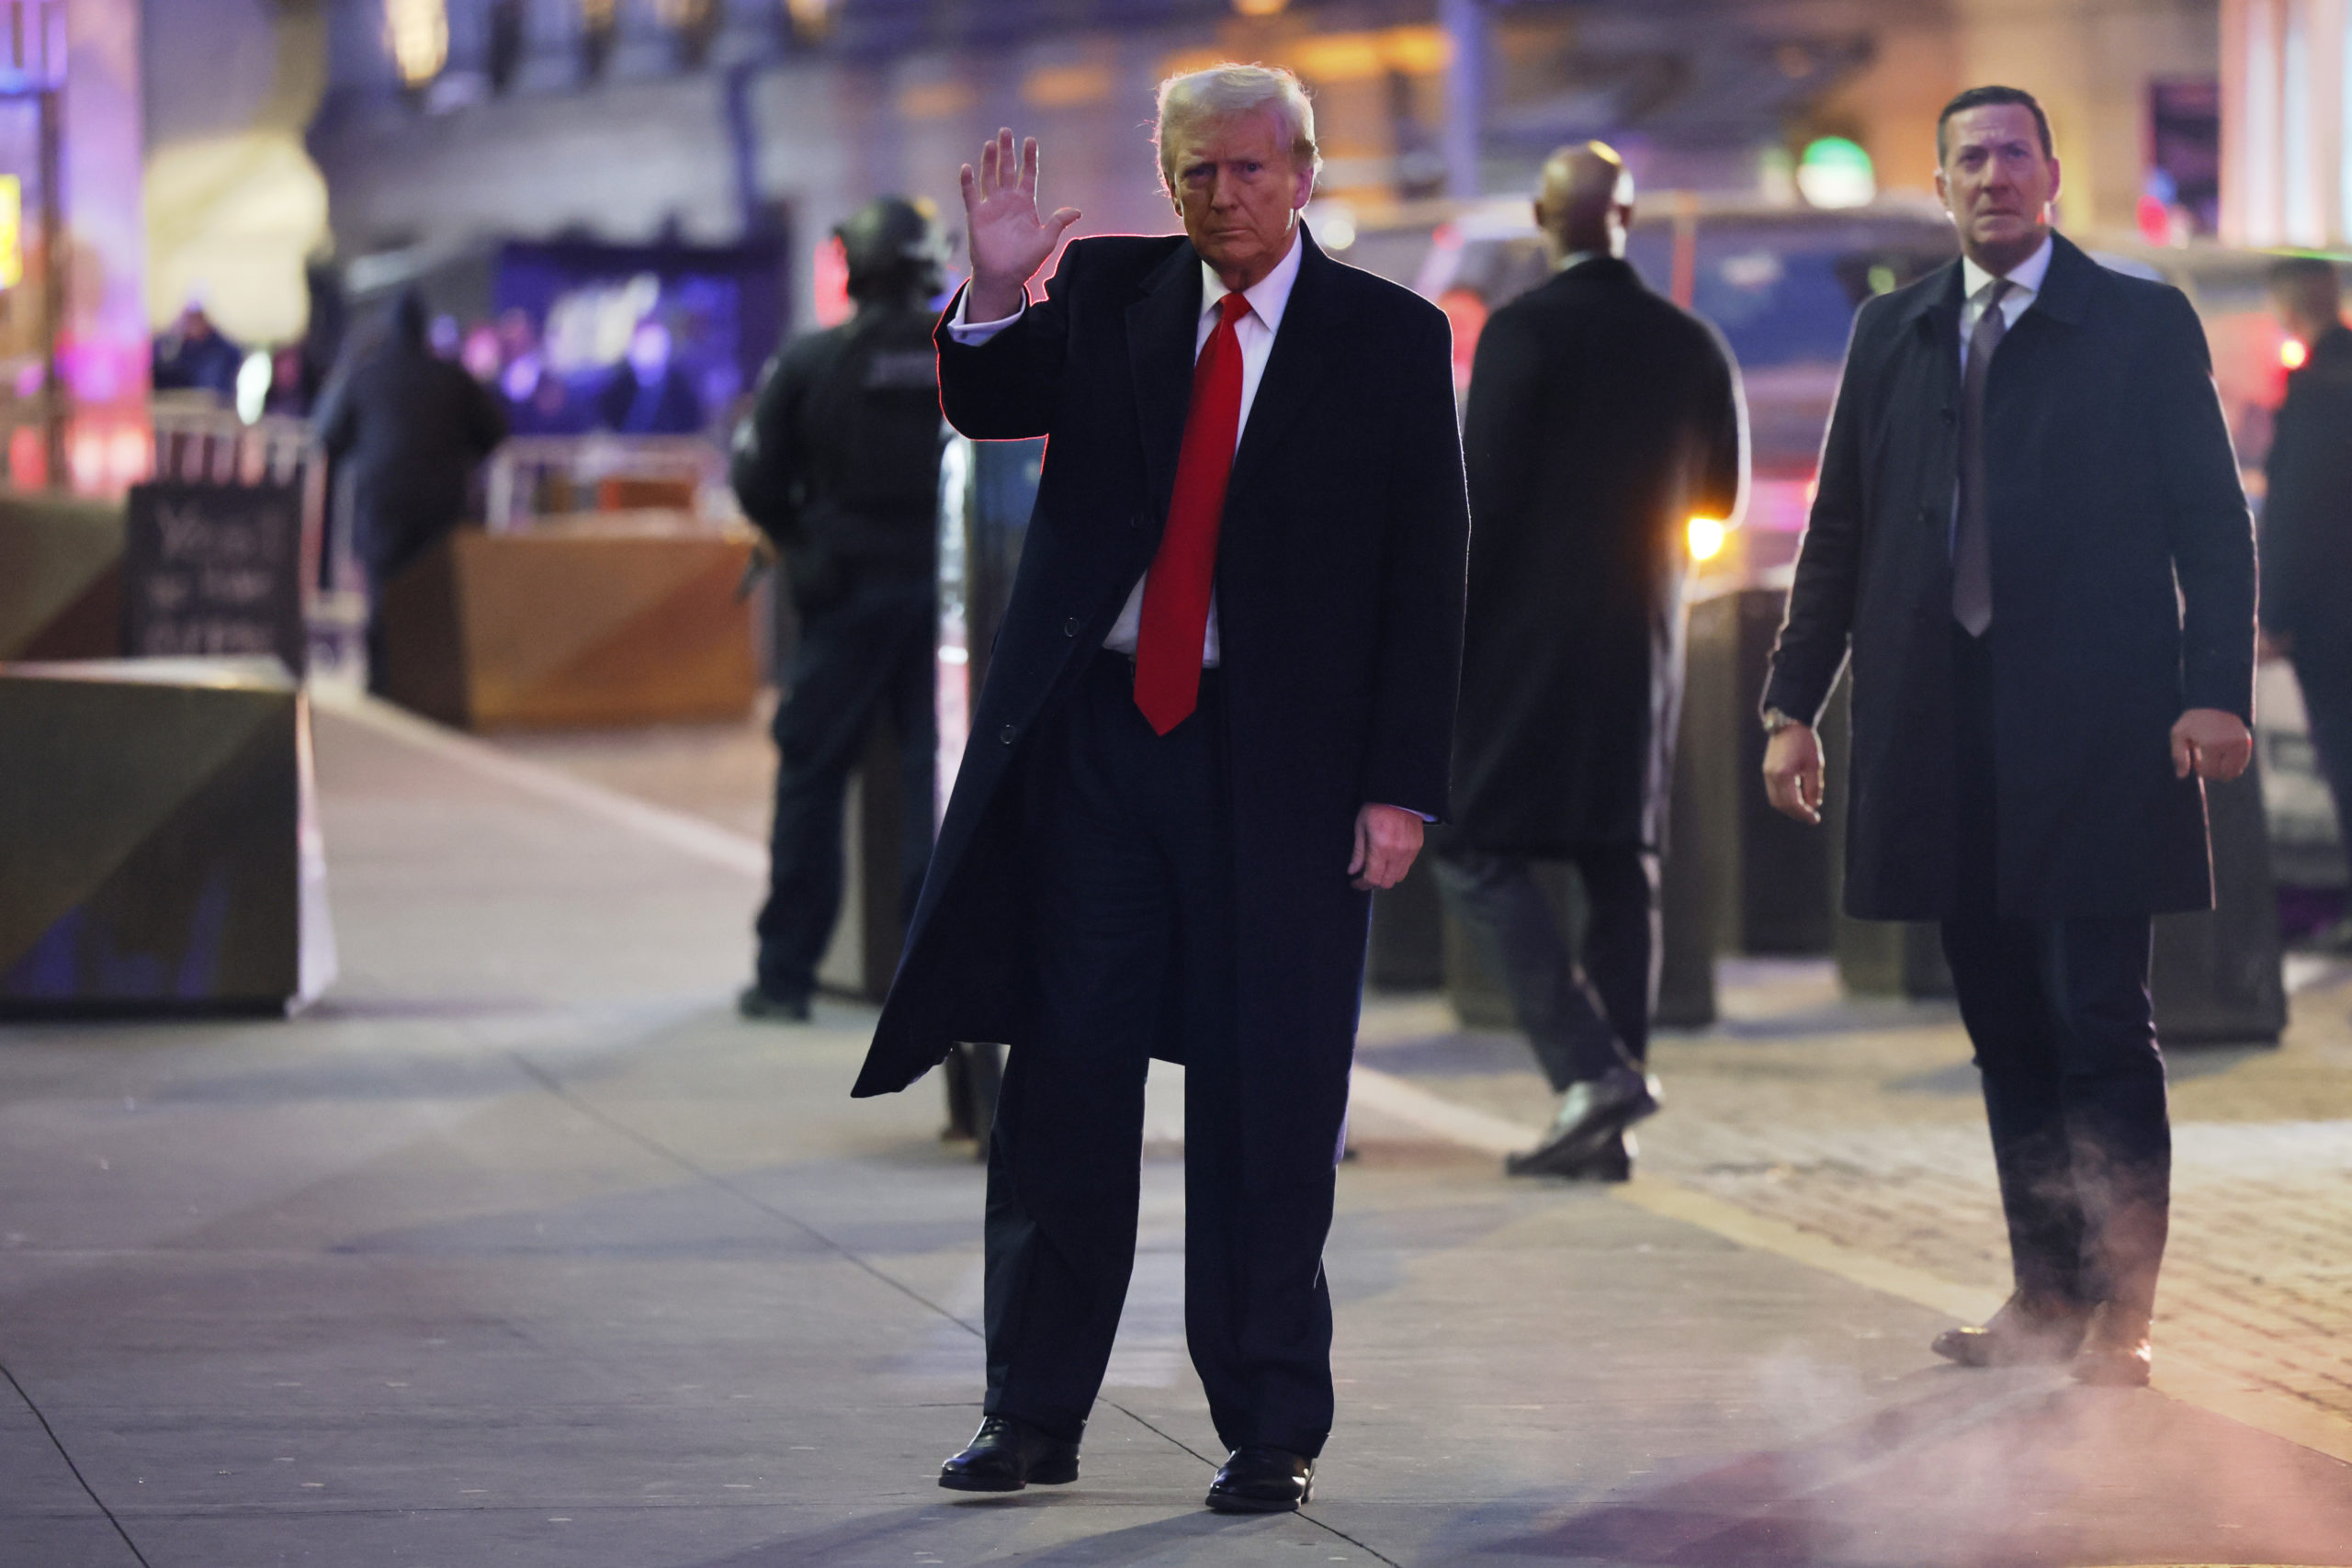 Donald Trump arriving for a news conference in New York City